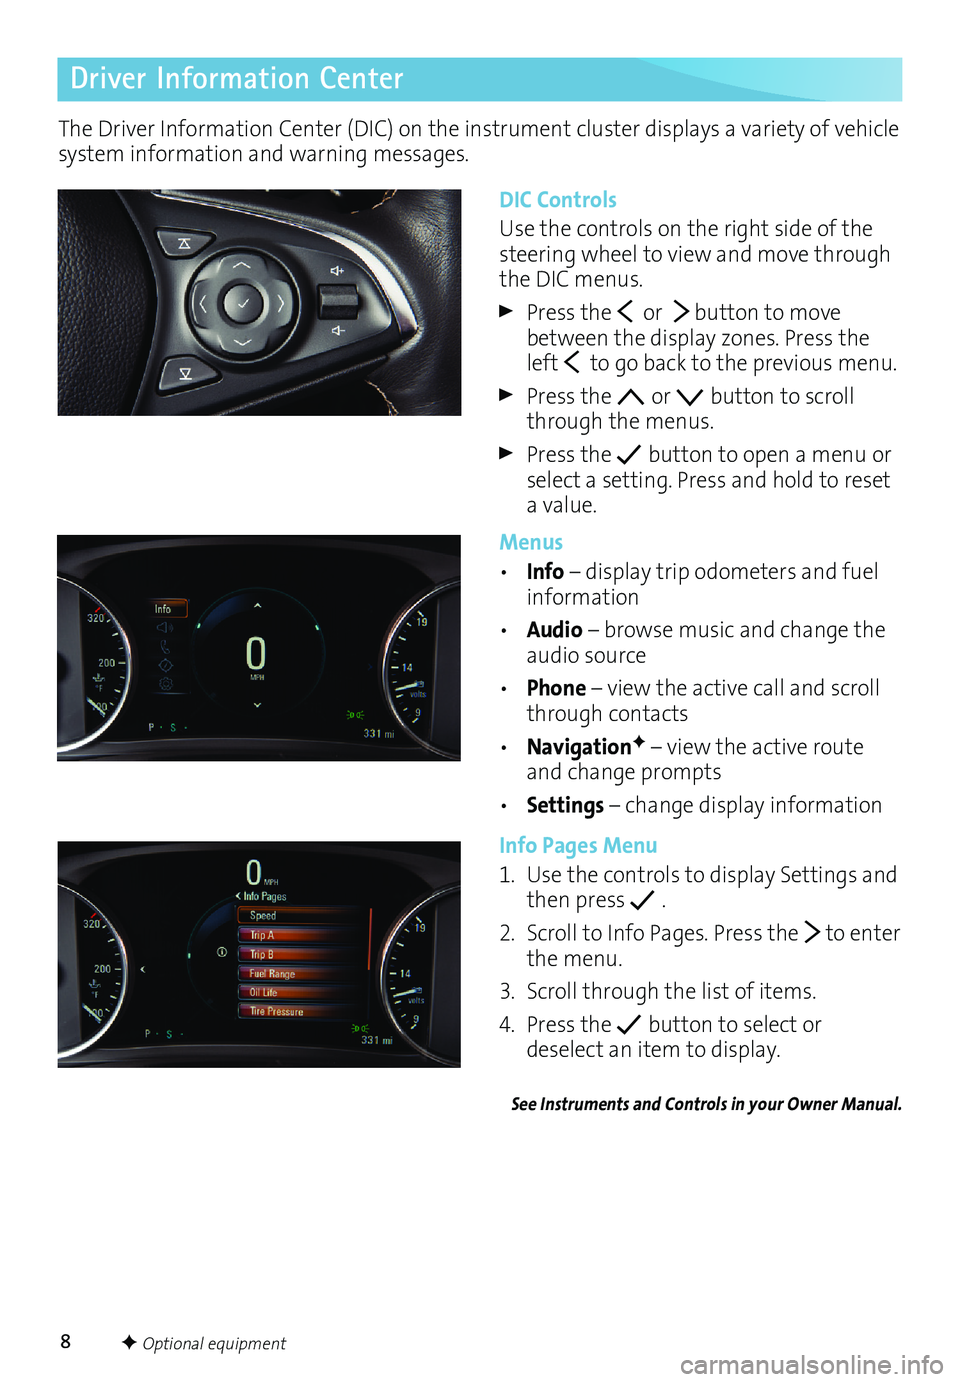 BUICK ENVISION 2016  Get To Know Guide 8
Driver Information Center
The Driver Information Center (DIC) on the instrument cluster displays a variety of vehicle 
system information and warning messages.
DIC Controls
Use the controls on the r